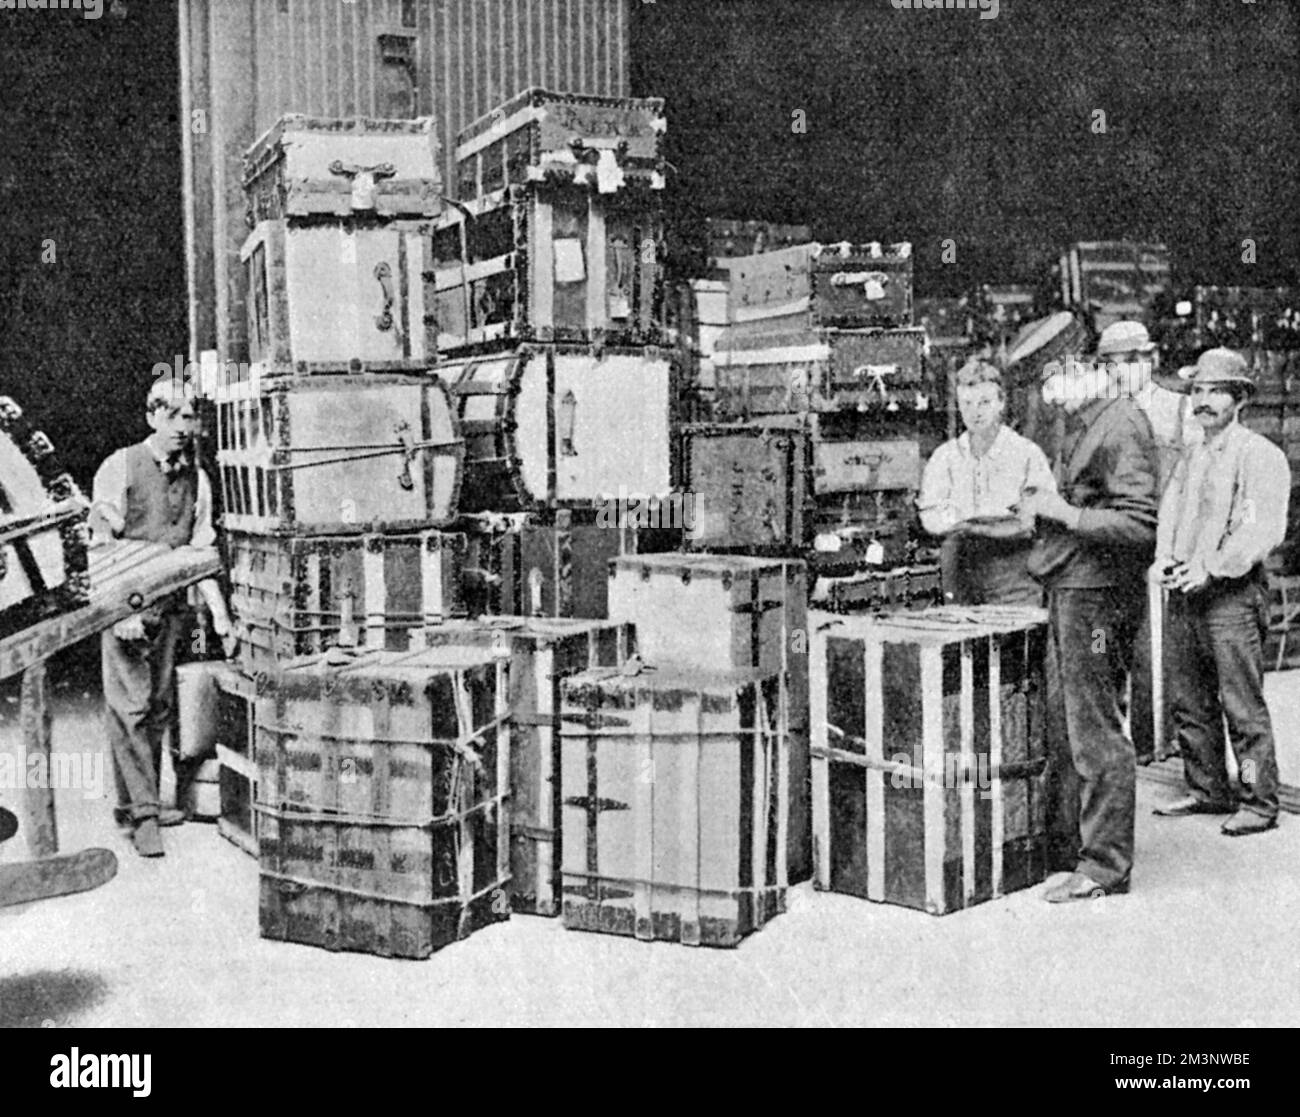 A huge stack of trunks, portmanteaux, dress baskets and suitcases representing the substantial trousseau of Miss Mary (May) Goelet, American heiress, who married Henry Innes-Kerr, 8th Duke of Roxburghe in 1903, becoming Duchess of Roxburghe and bringing with her a dowry of some $20 million.       Date: 1903 Stock Photo